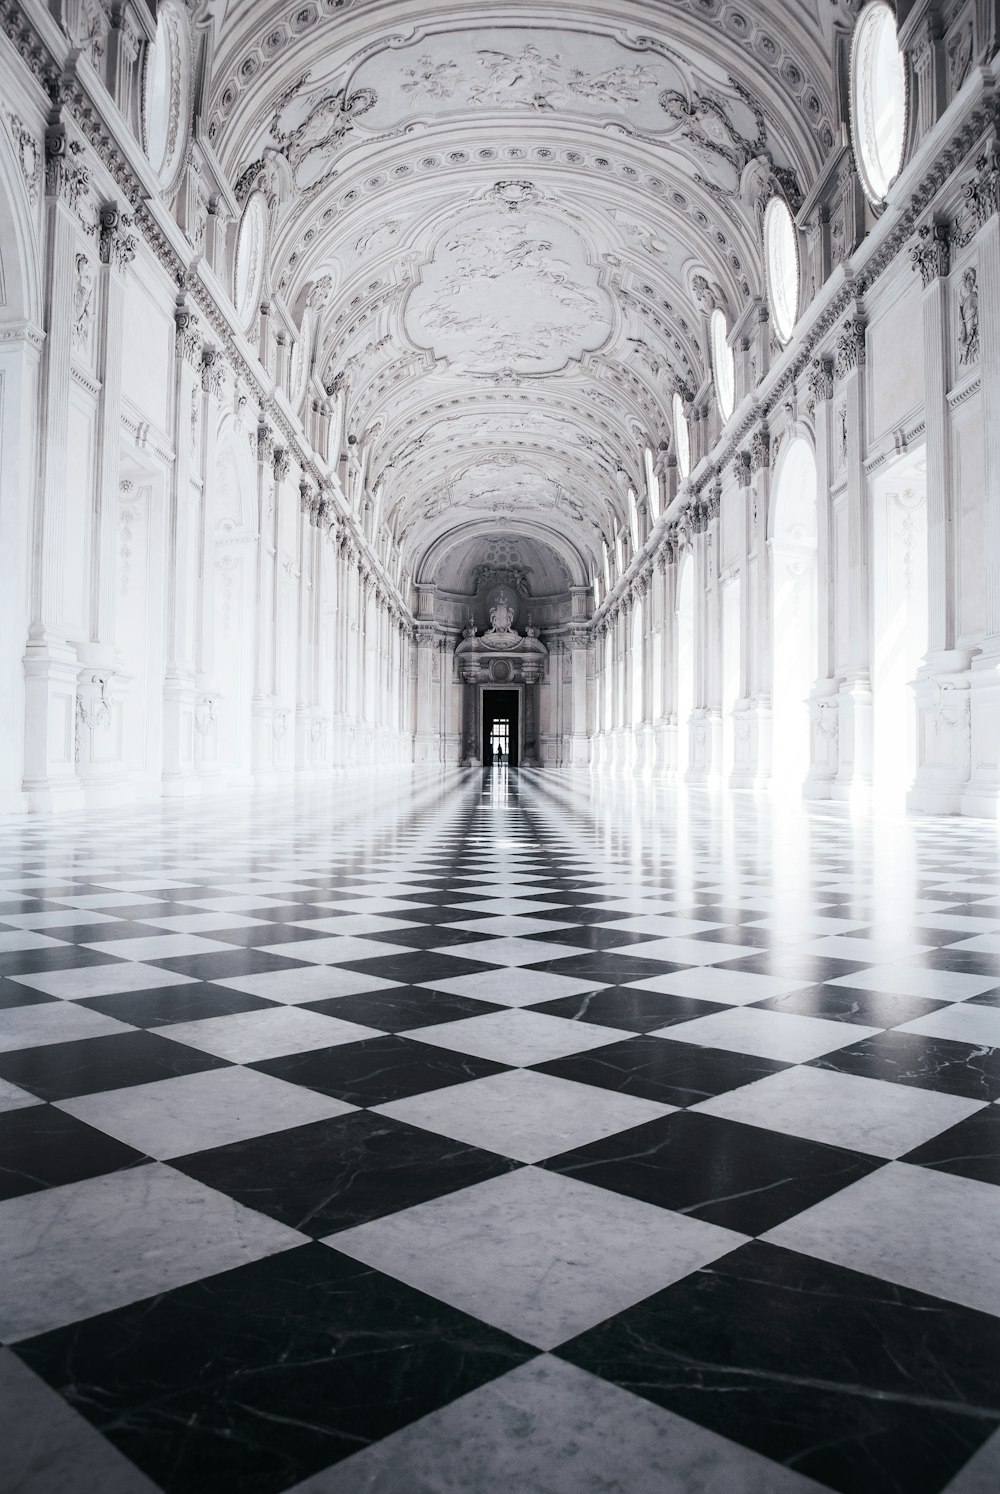 Royal Palace Pictures | Download Free Images on Unsplash